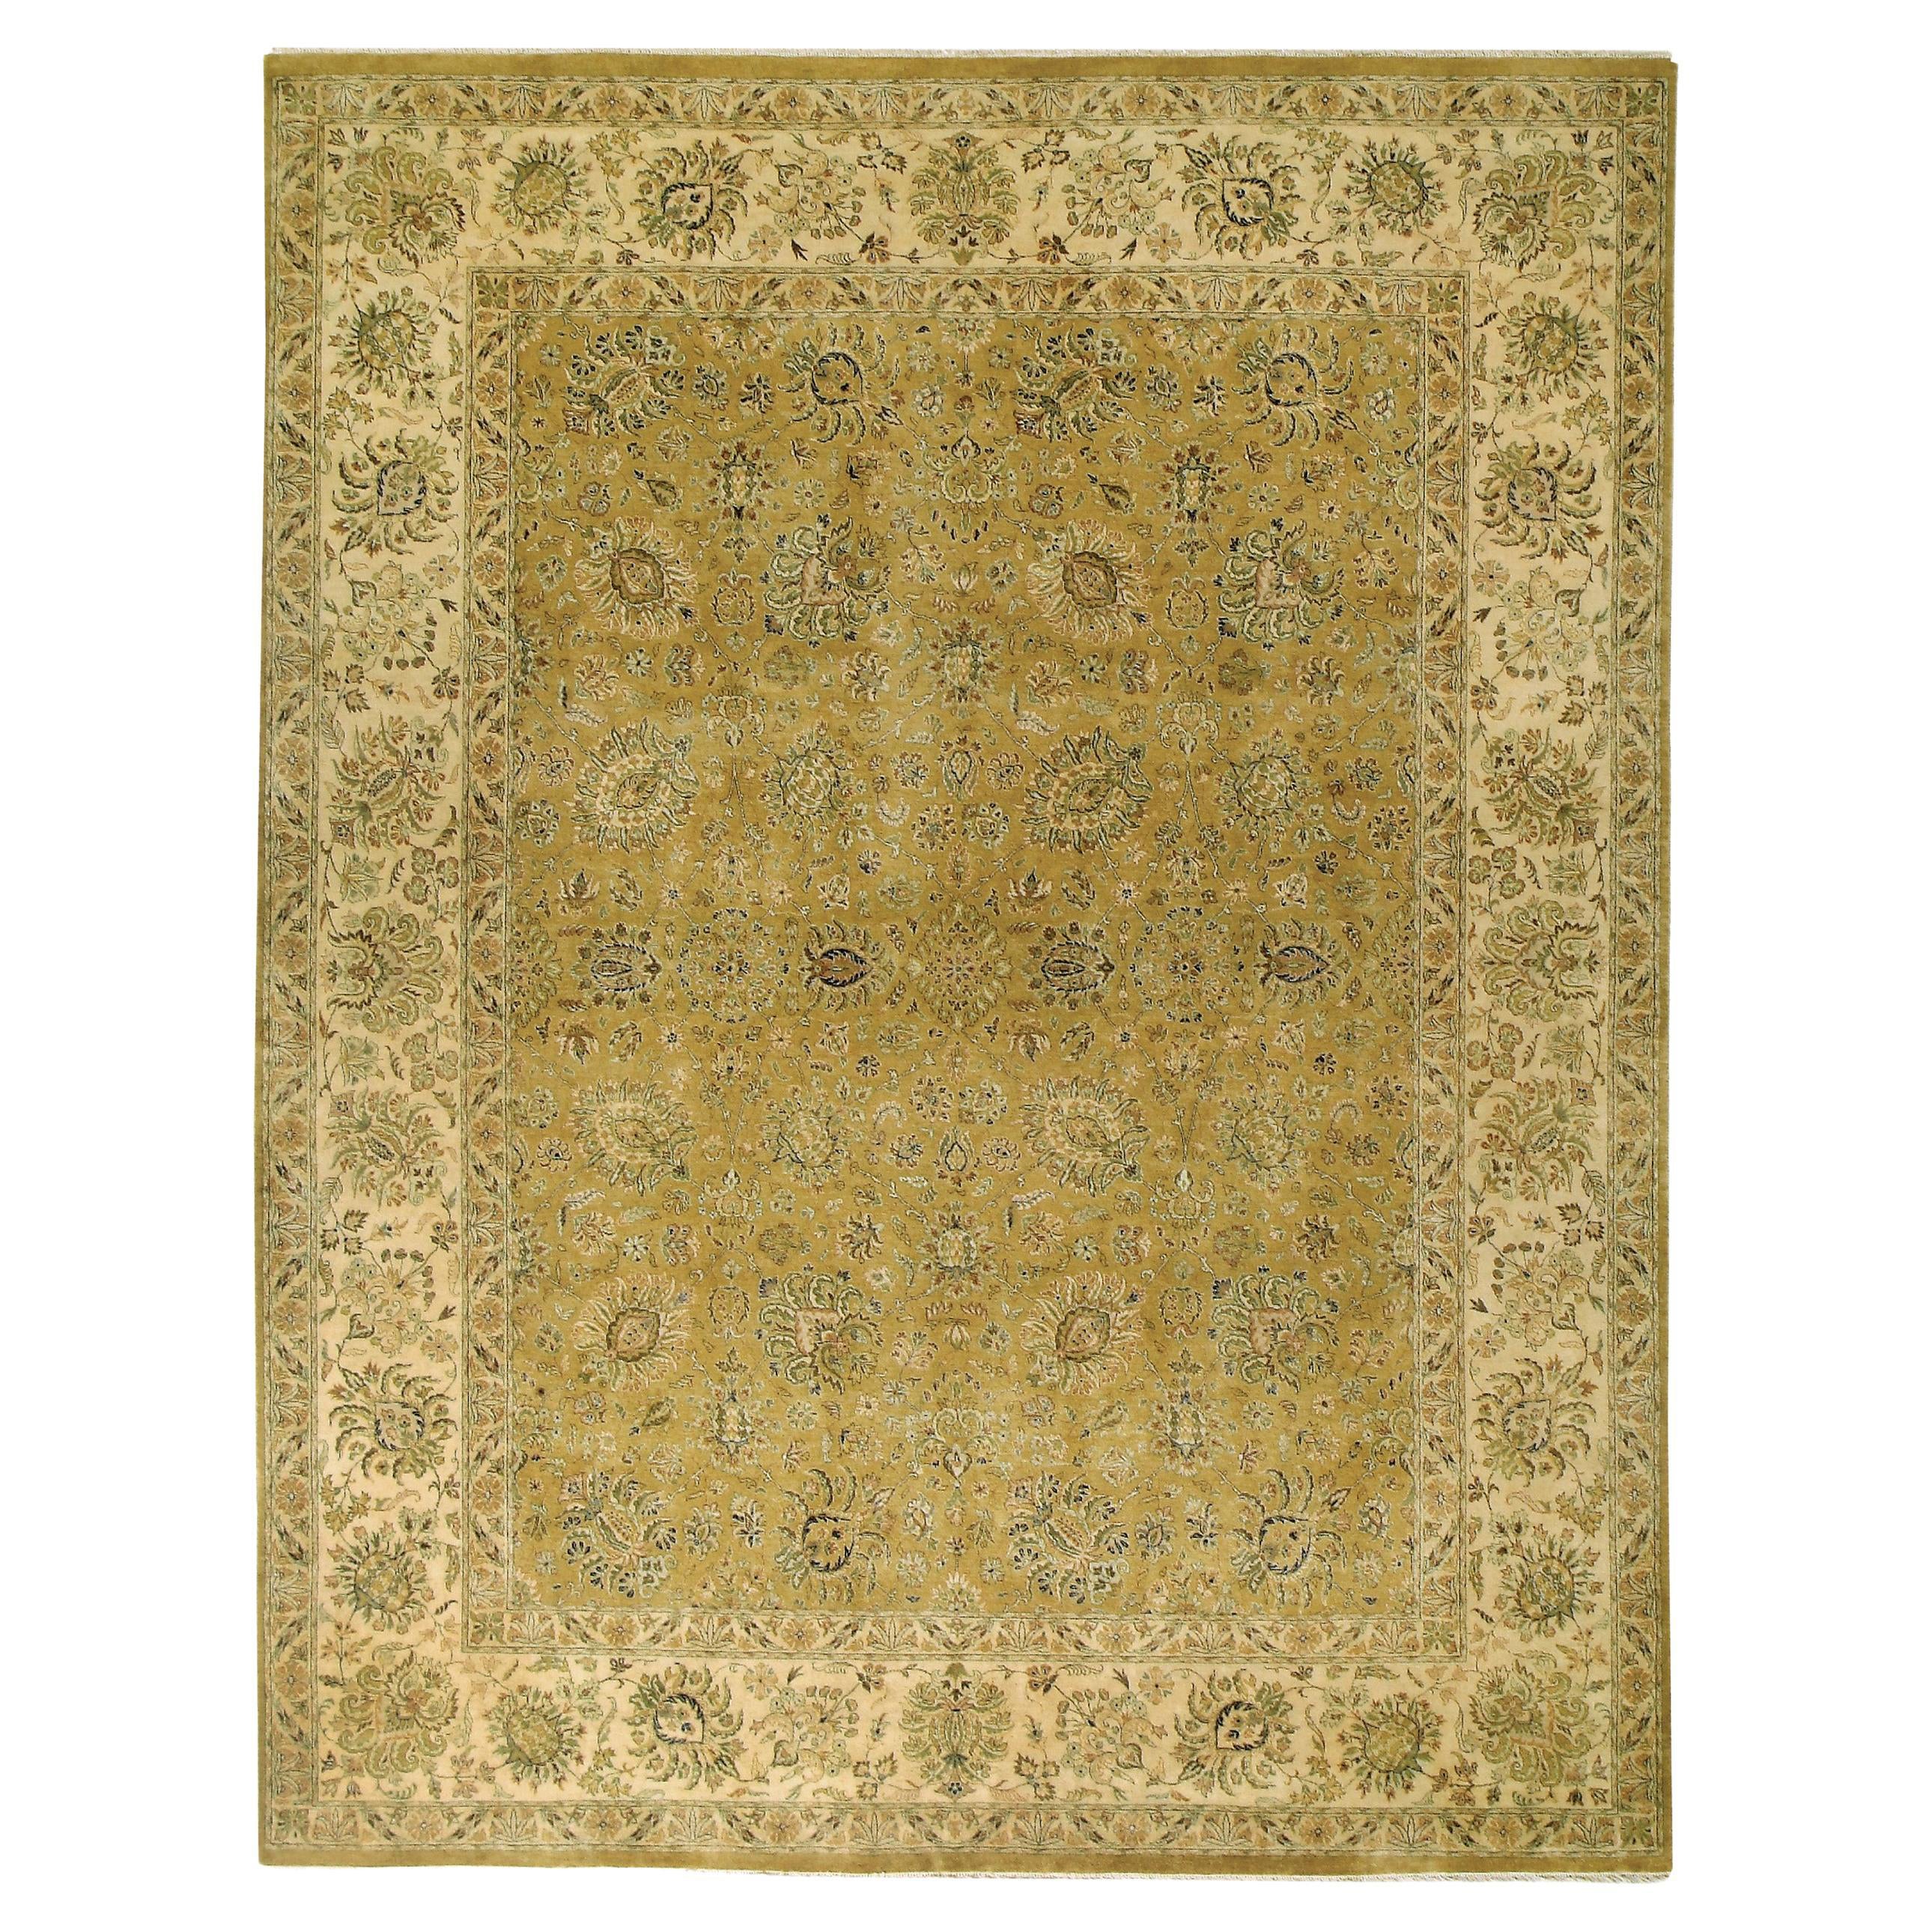 Luxury Traditional Hand-Knotted Reatta Gold and Cream 10x14 Rug